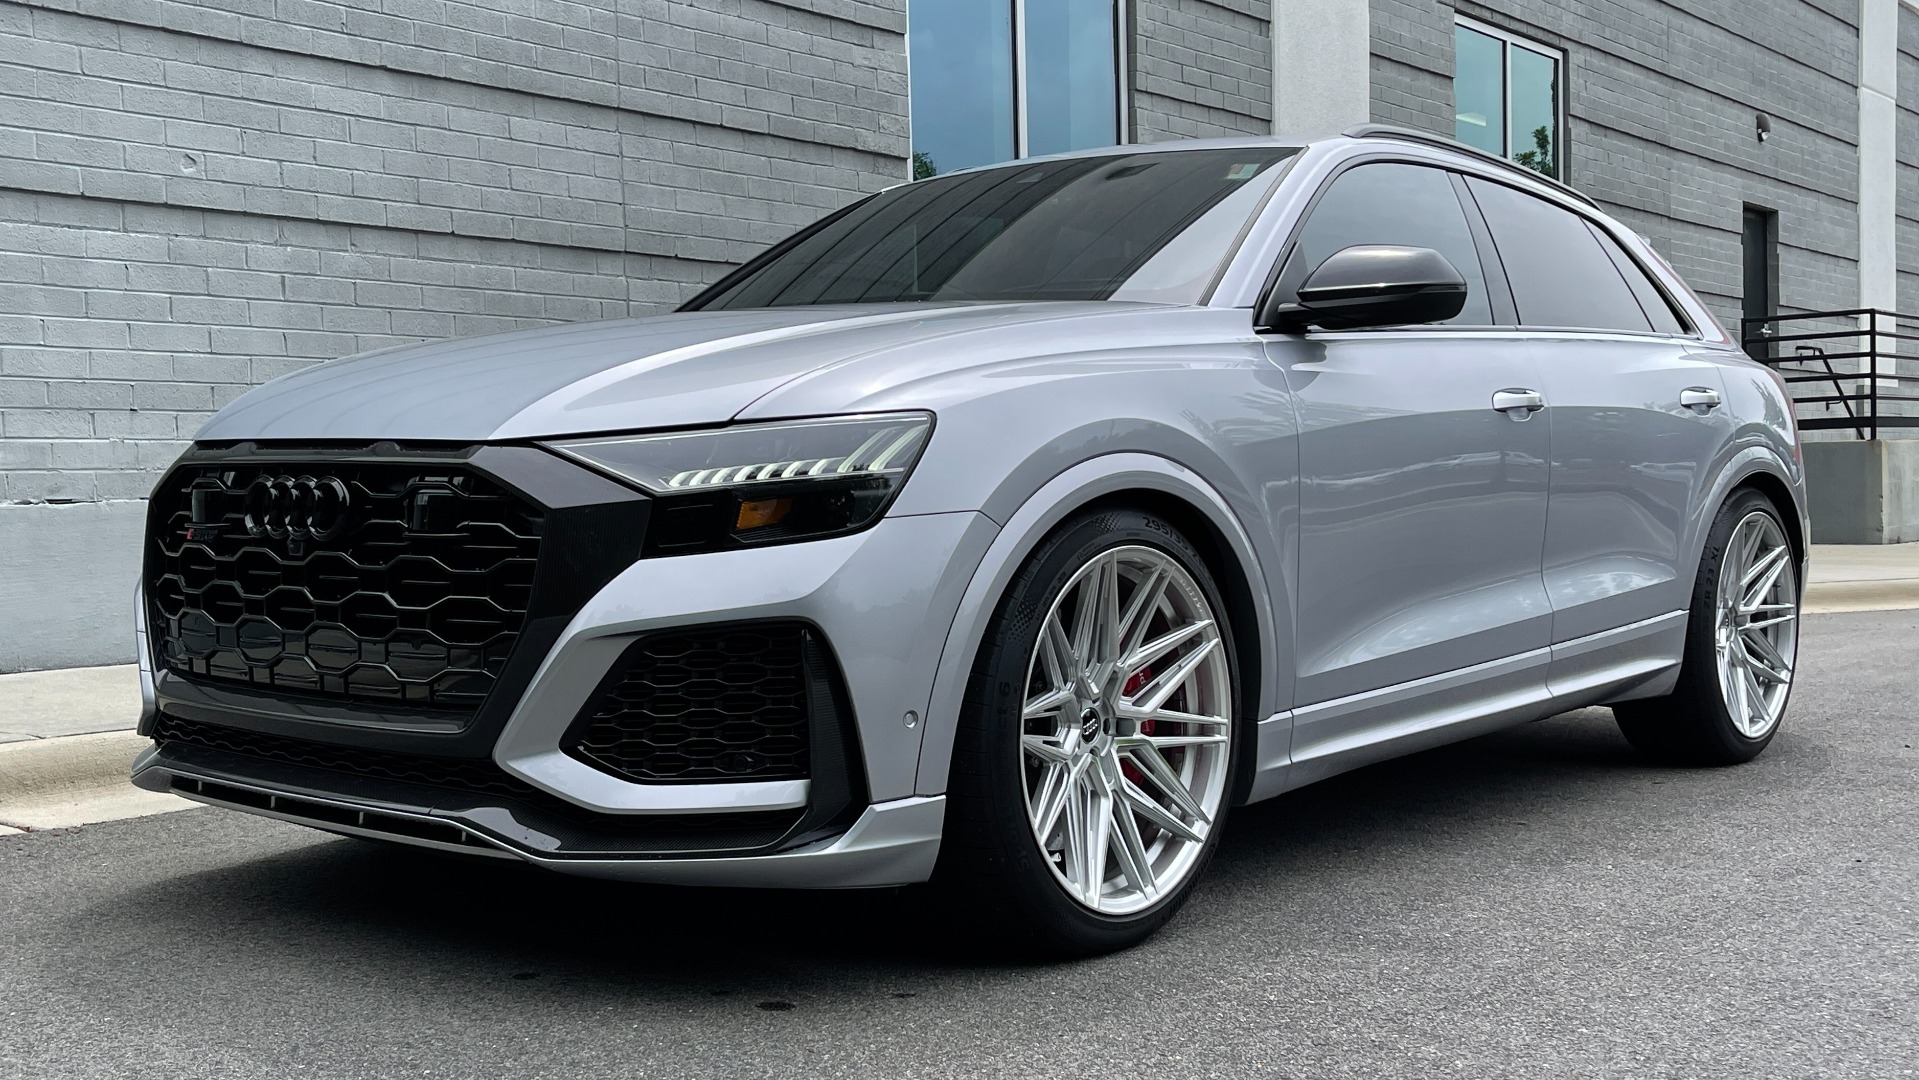 Used 2021 Audi RS Q8 4.0 TFSA QUATTRO / LUX / EXEC / CARBON & BLACK OPTIC / DRVR ASST / TOWING for sale $147,995 at Formula Imports in Charlotte NC 28227 5